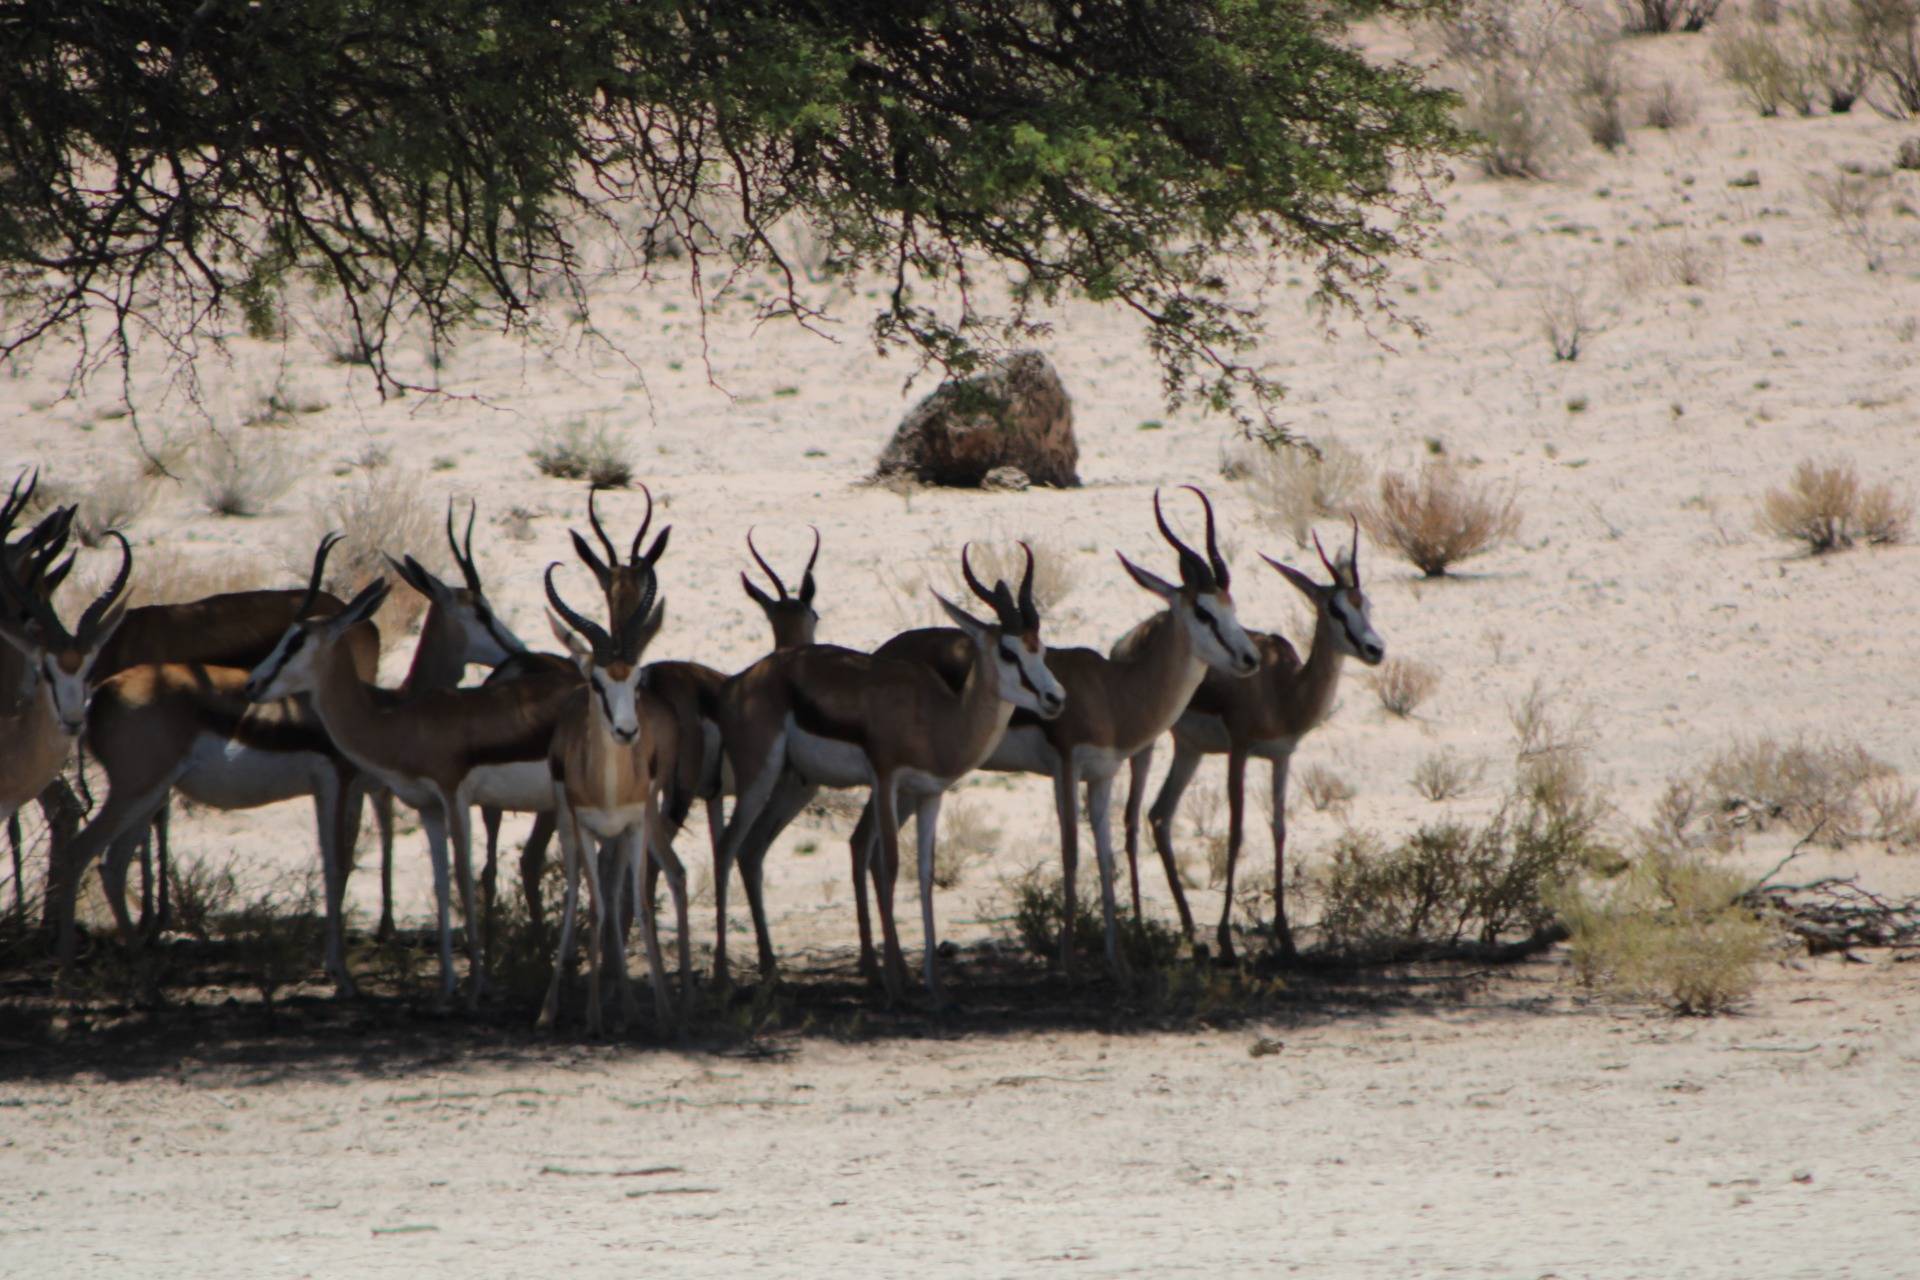 Some Springbok trying to hide away from the hot midday sun.